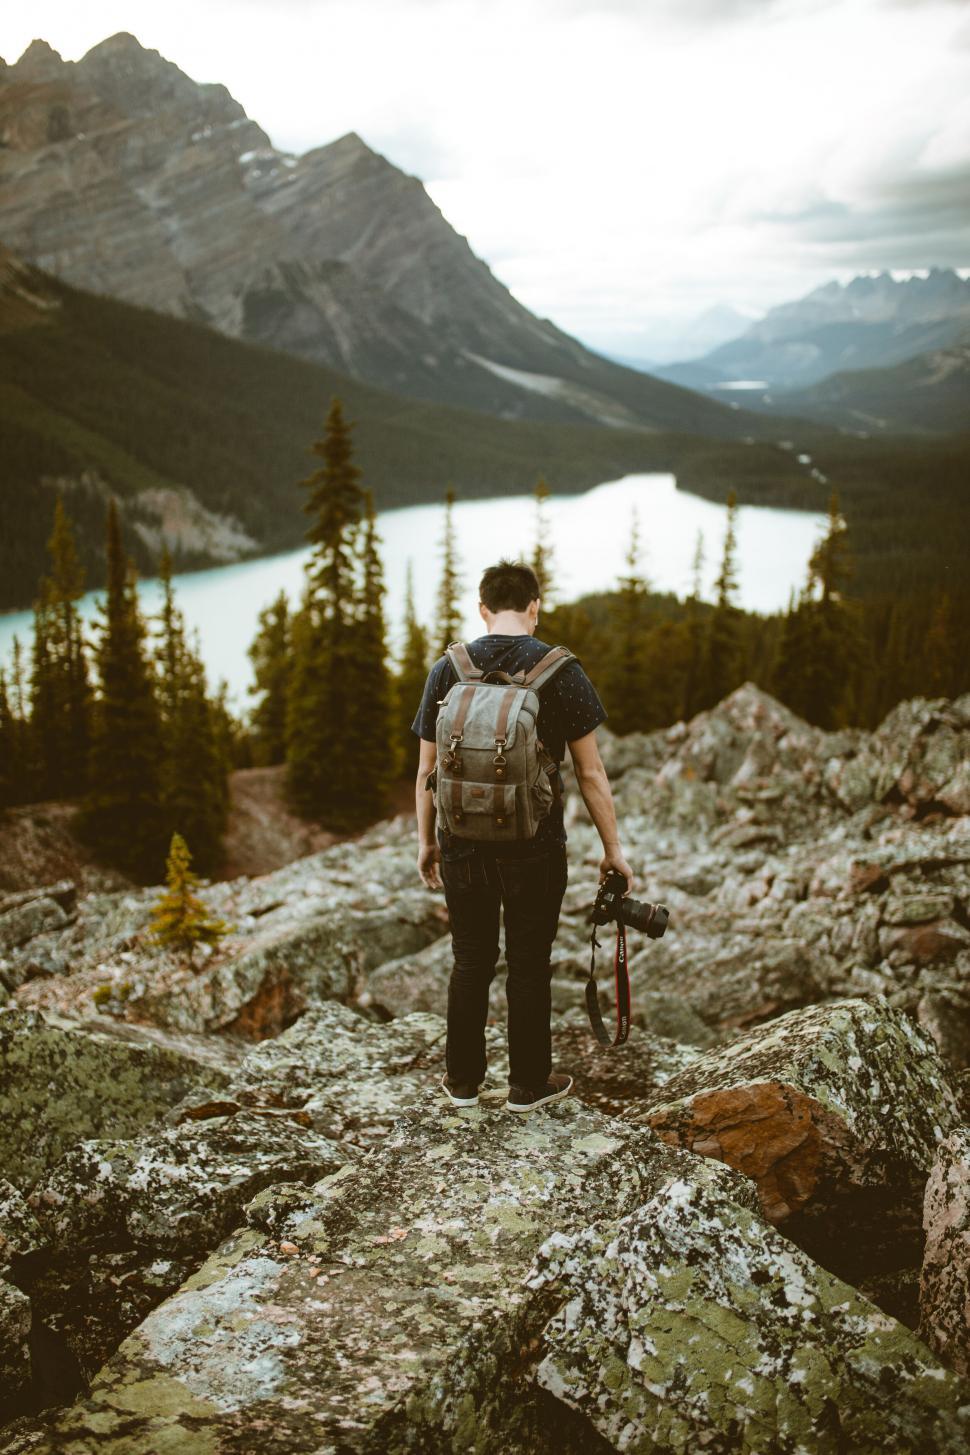 Free Image of Backpacker admiring a majestic mountain lake view 